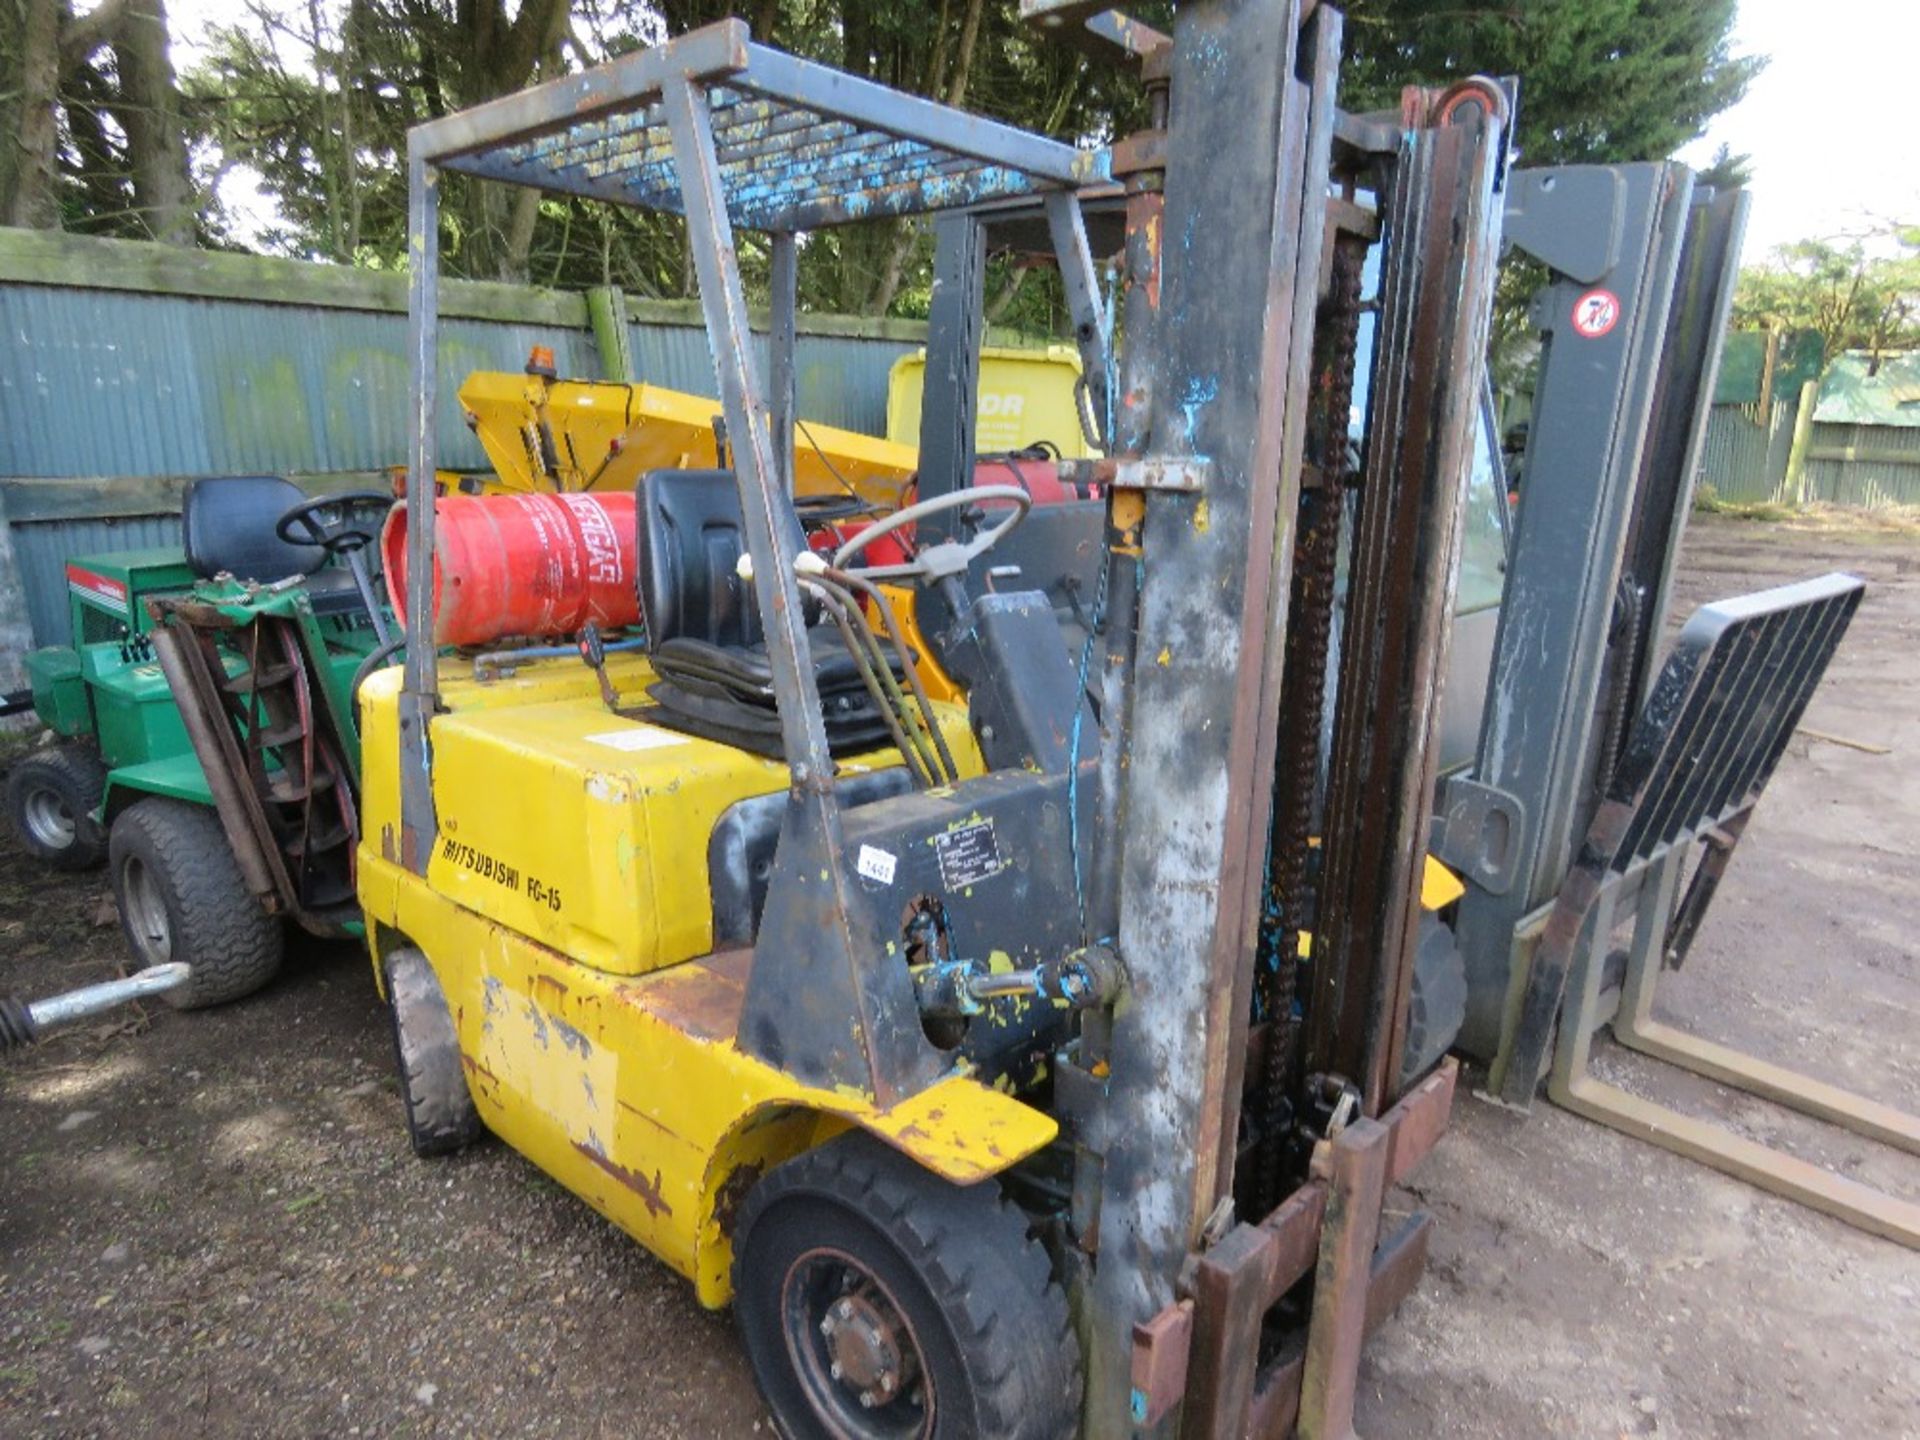 MITSUBISHI FG15 GAS POWERED FORKLIFT. WHEN TESTED WAS SEEN TO START AND RUN BRIEFLY BUT CUTTING OUT. - Image 2 of 8